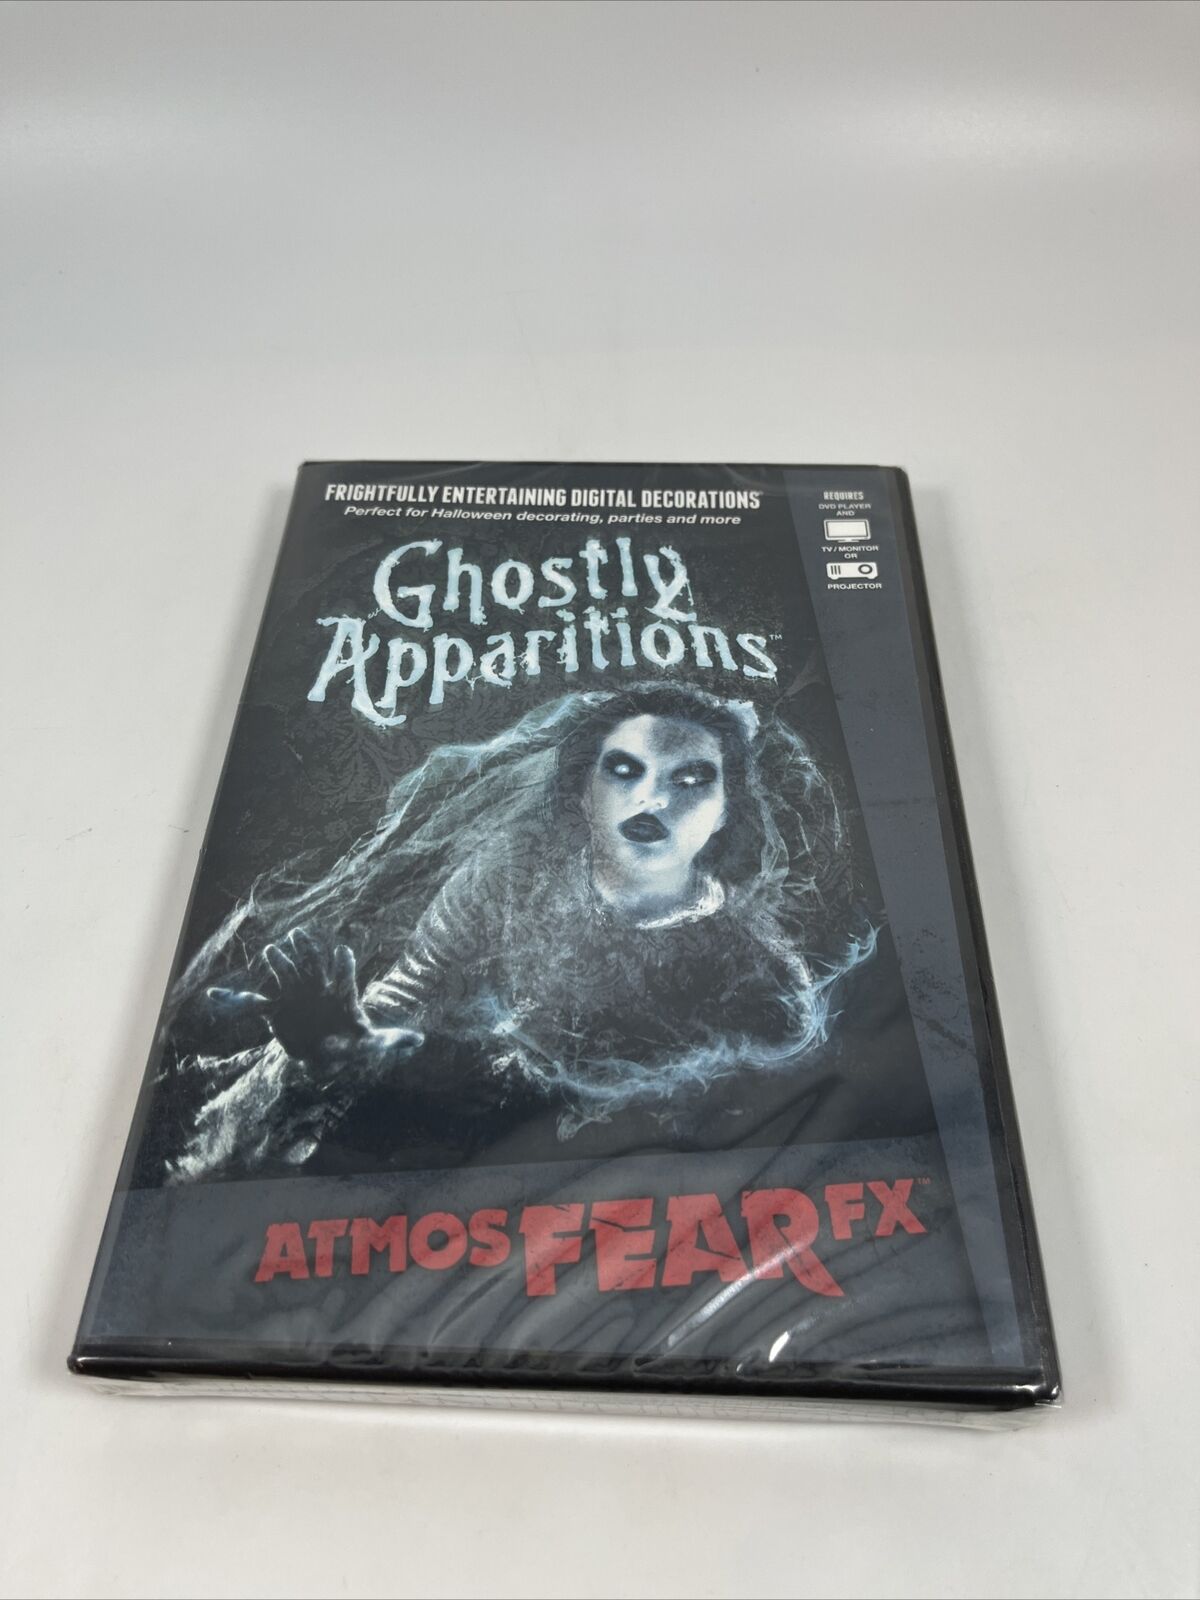 AtmosFEARfx Ghostly Apparitions Digital Decorations New & Sealed